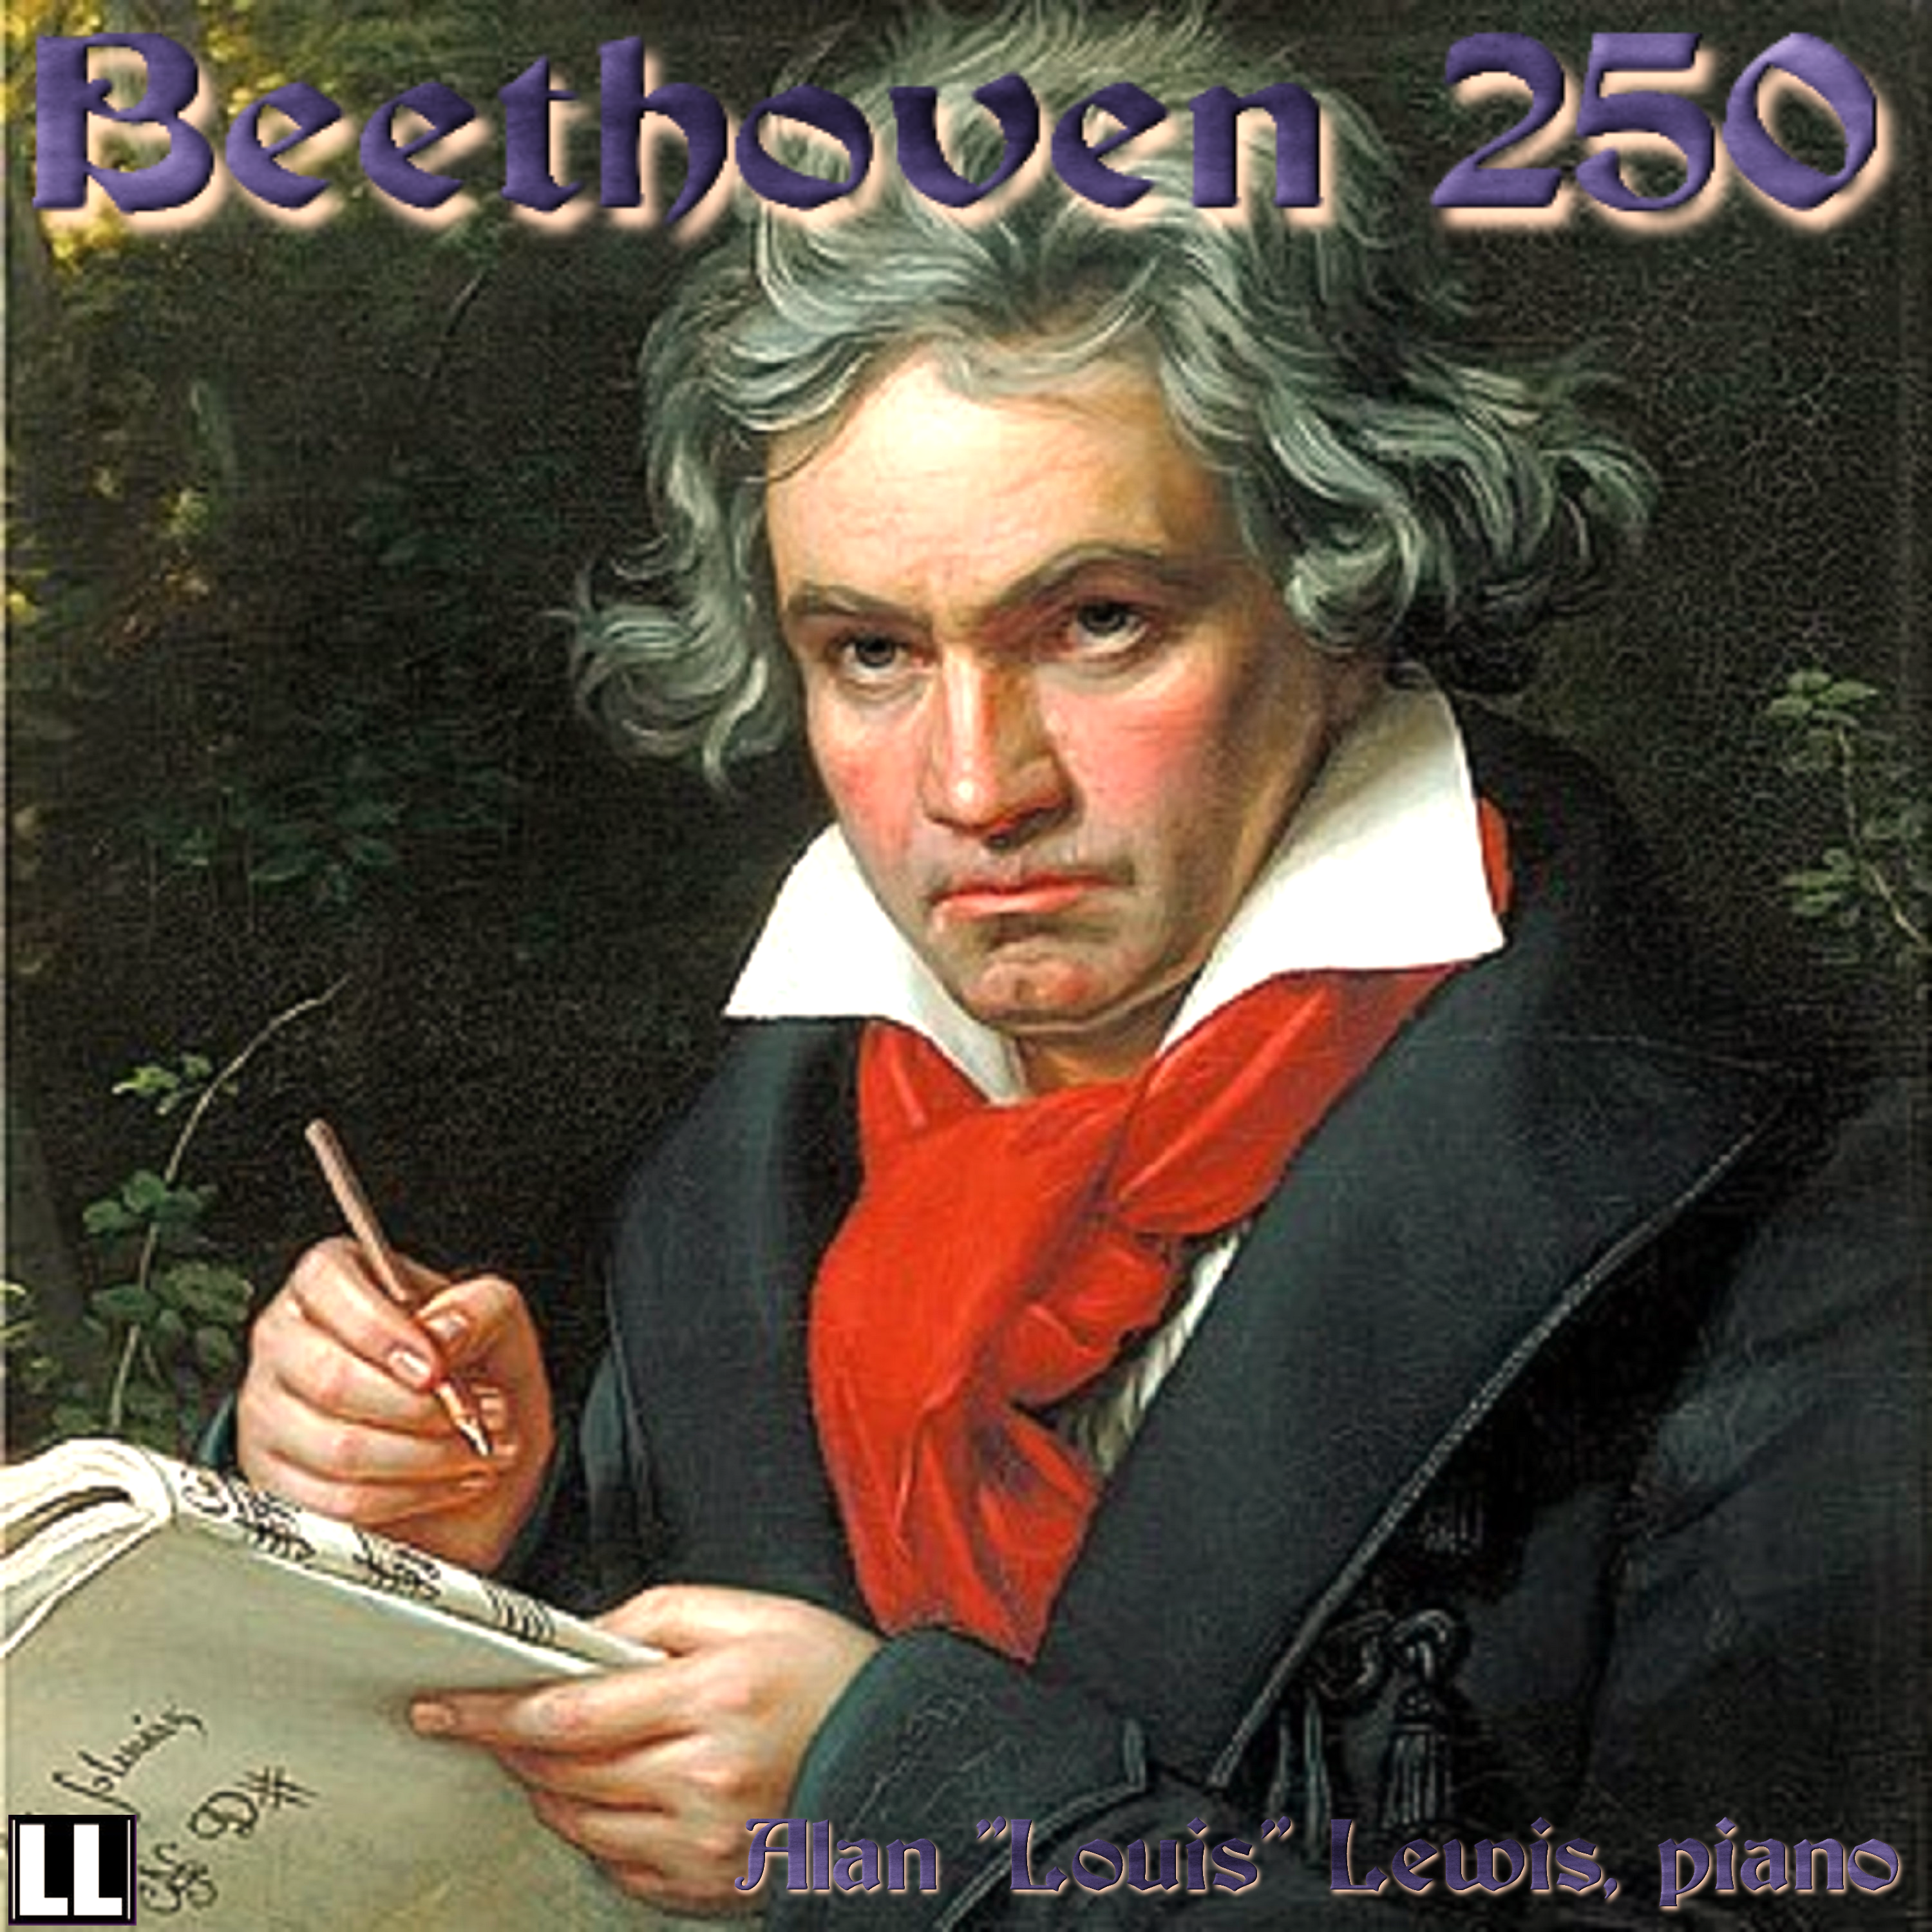 image of Beethoven album cover